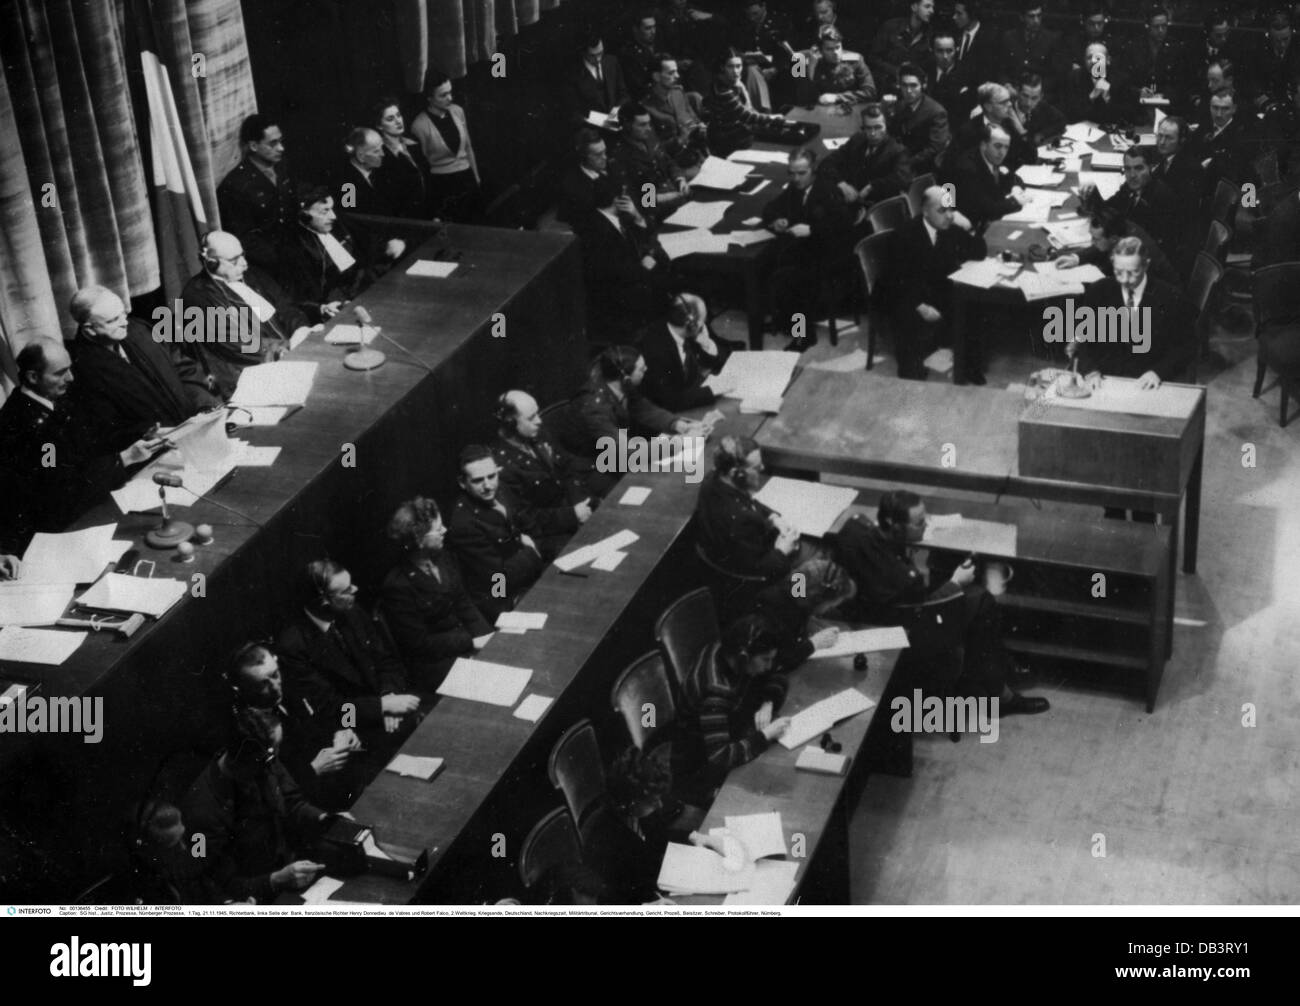 justice, lawsuits, Nuremberg Trials, Trial of the Major War Criminals 1945/1946, first day, 21.11.1945, left side of the judge's bench with the French judges Henry Donnedieu de Vabres and Robert Falco, Second World War, WWII, end, Germany, postwar period, International Military Tribunal, lawsuit, court proceedings, hearing, clerk, 1940s, 40s, 20th century, historic, historical, jurists, people, Additional-Rights-Clearences-Not Available Stock Photo